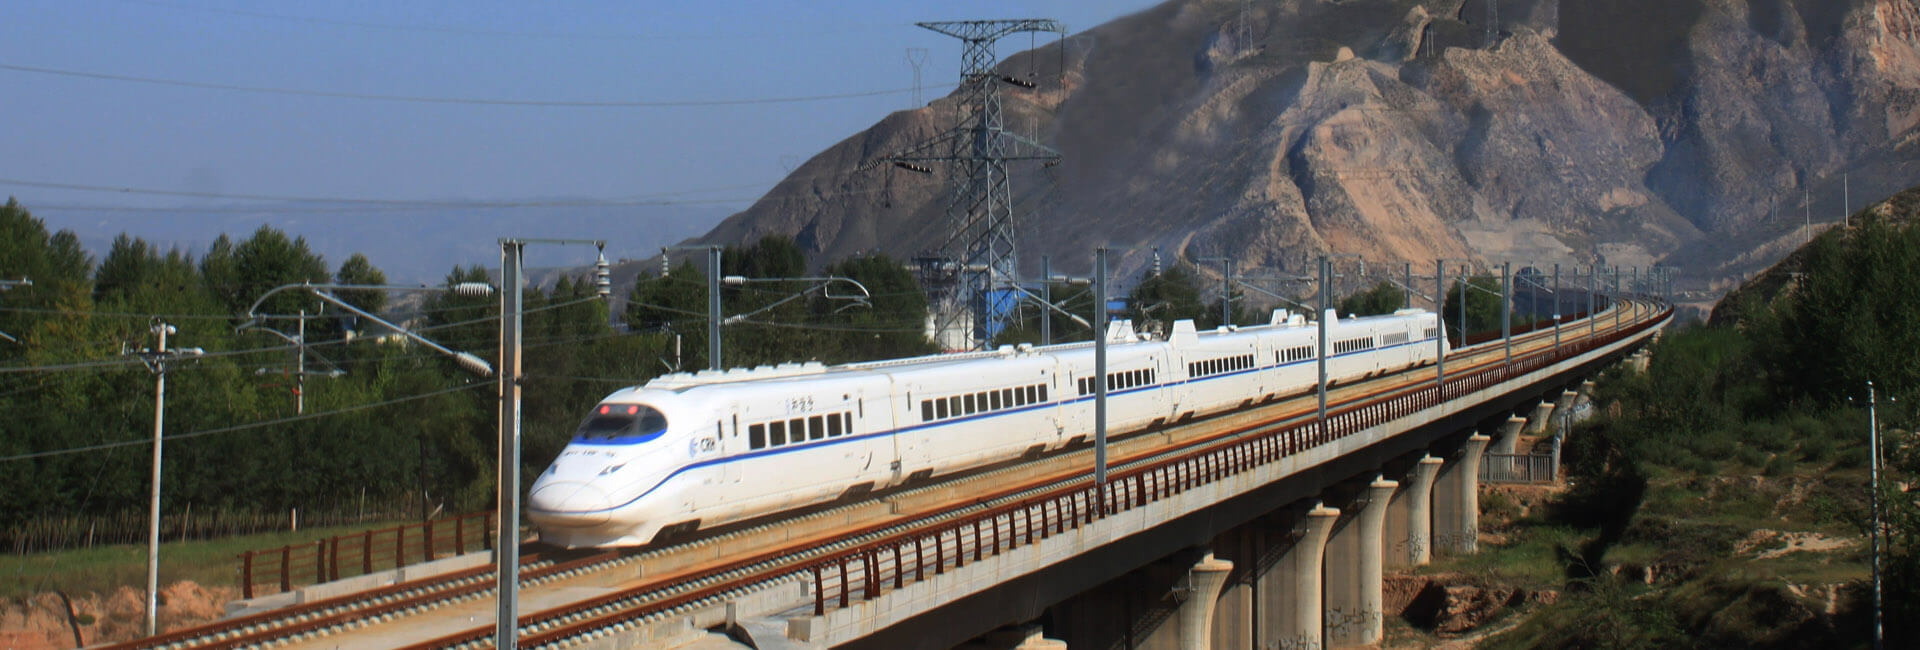 15 Days Classic Ancient China Silk Road Tour with Bullet Train Experience